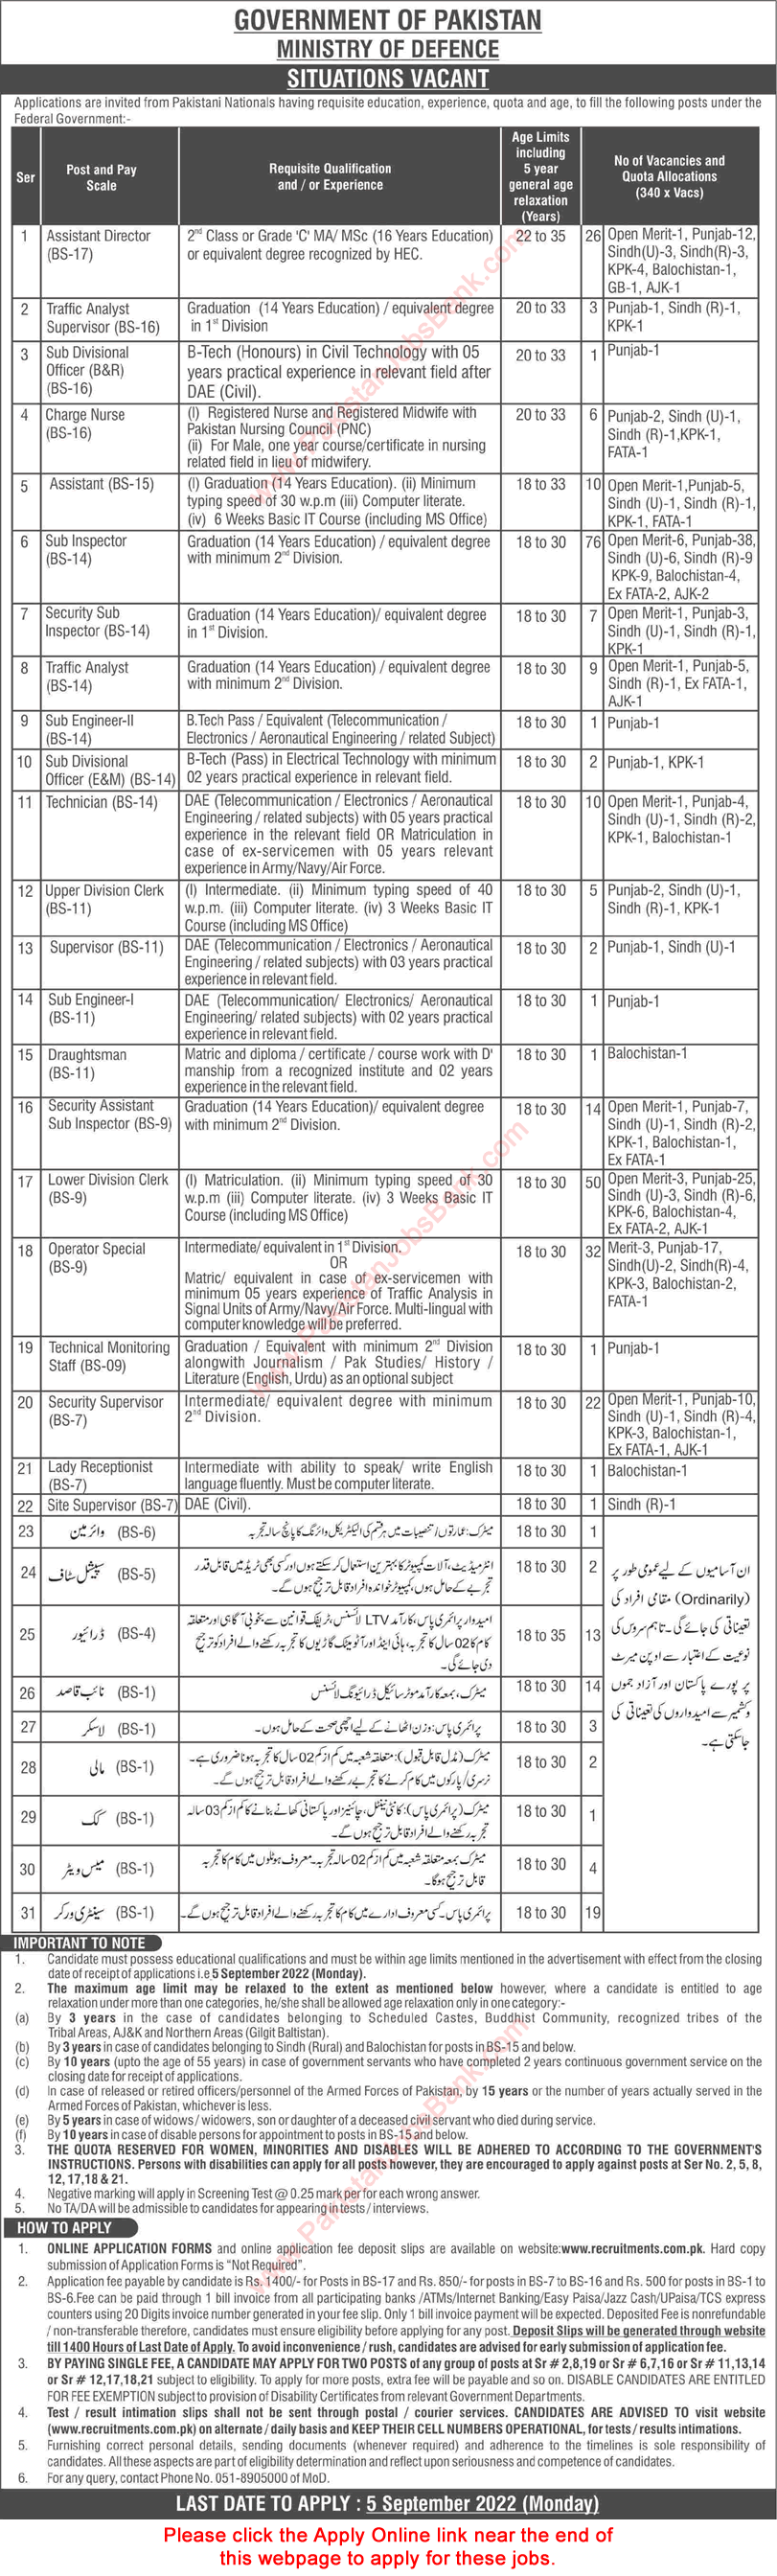 Ministry of Defence Jobs August 2022 Apply Online Sub Inspectors, Clerks, Operators & Others Latest